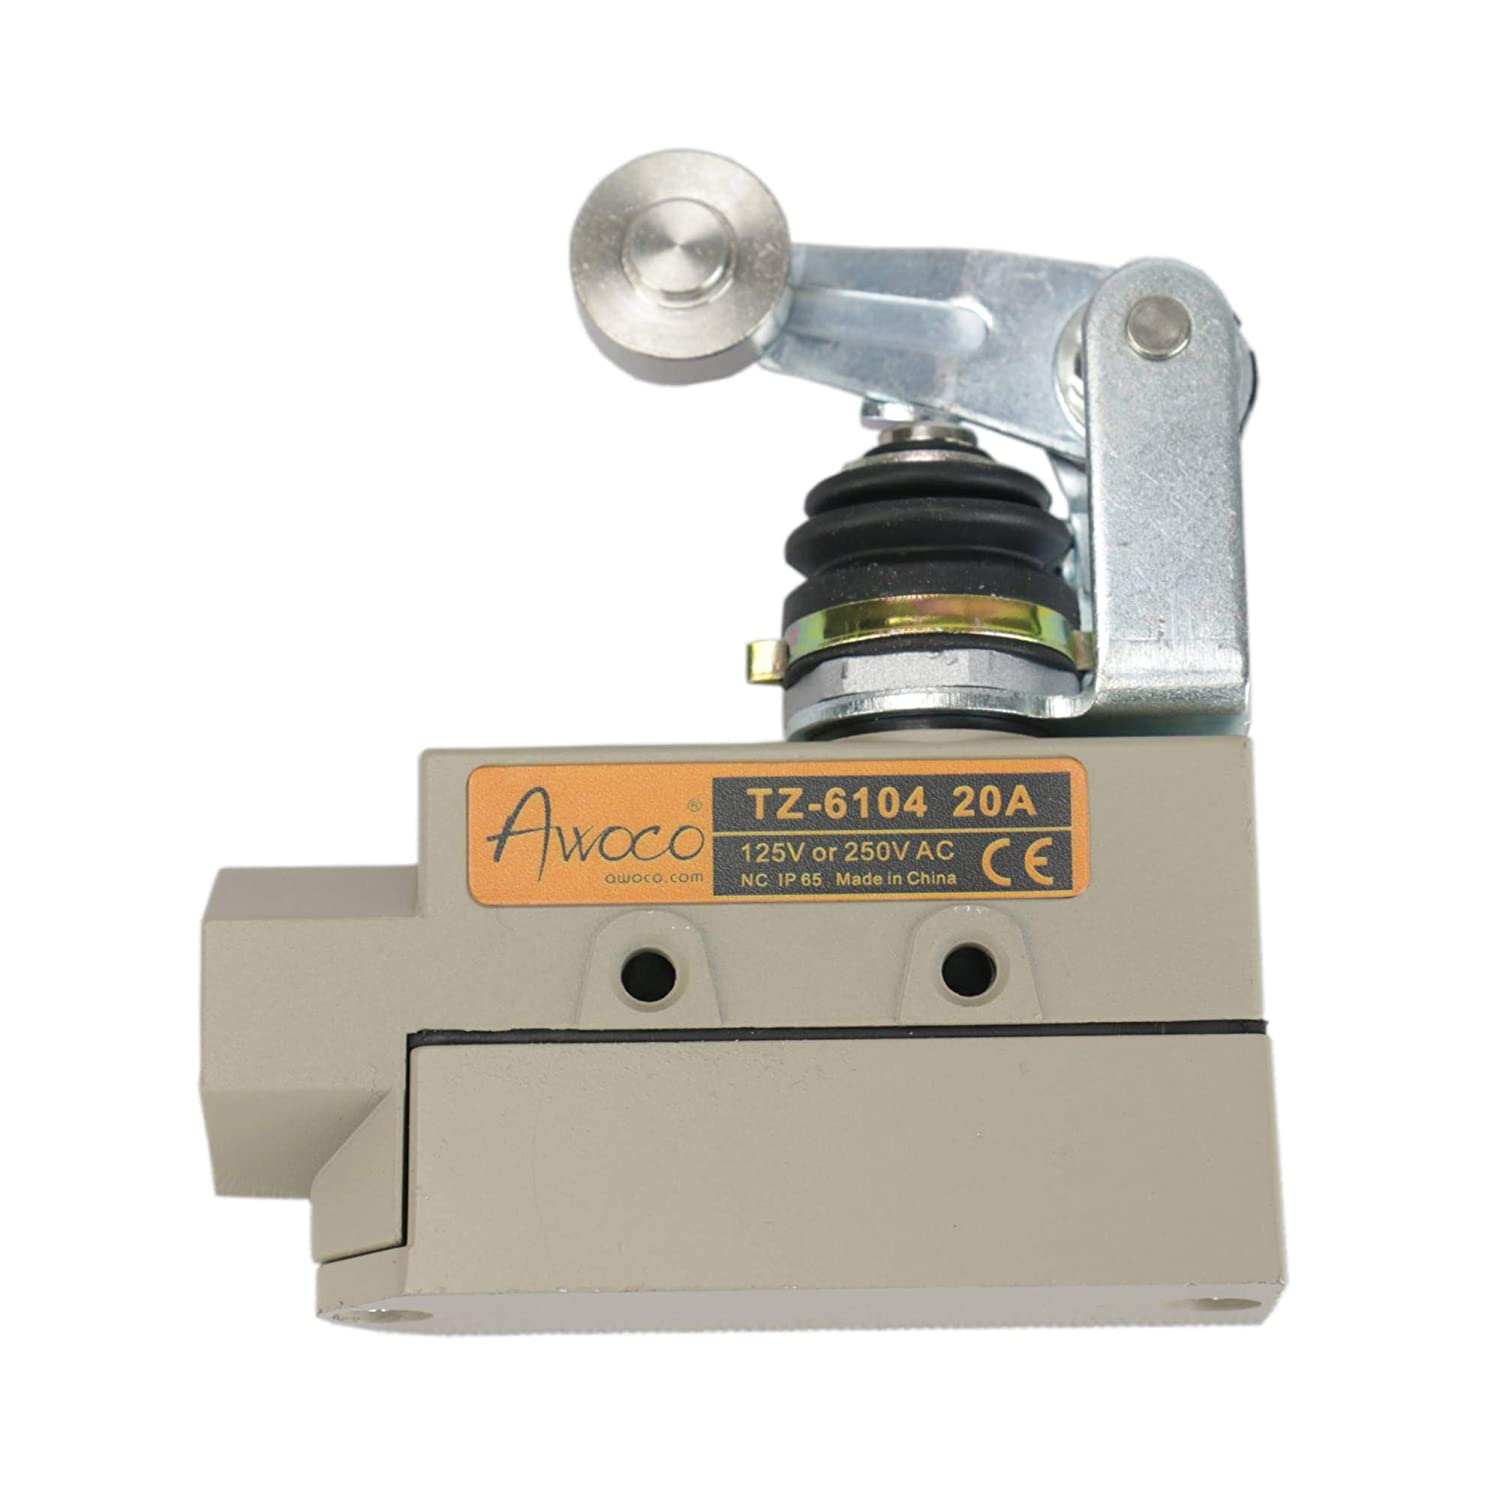 Awoco TZ-6104-20A Heavy Duty Commercial Door Micro Switch with Roller Plunger for Air Curtains, 250V 20A IP 65 Limit Switch Type NO and Type NC